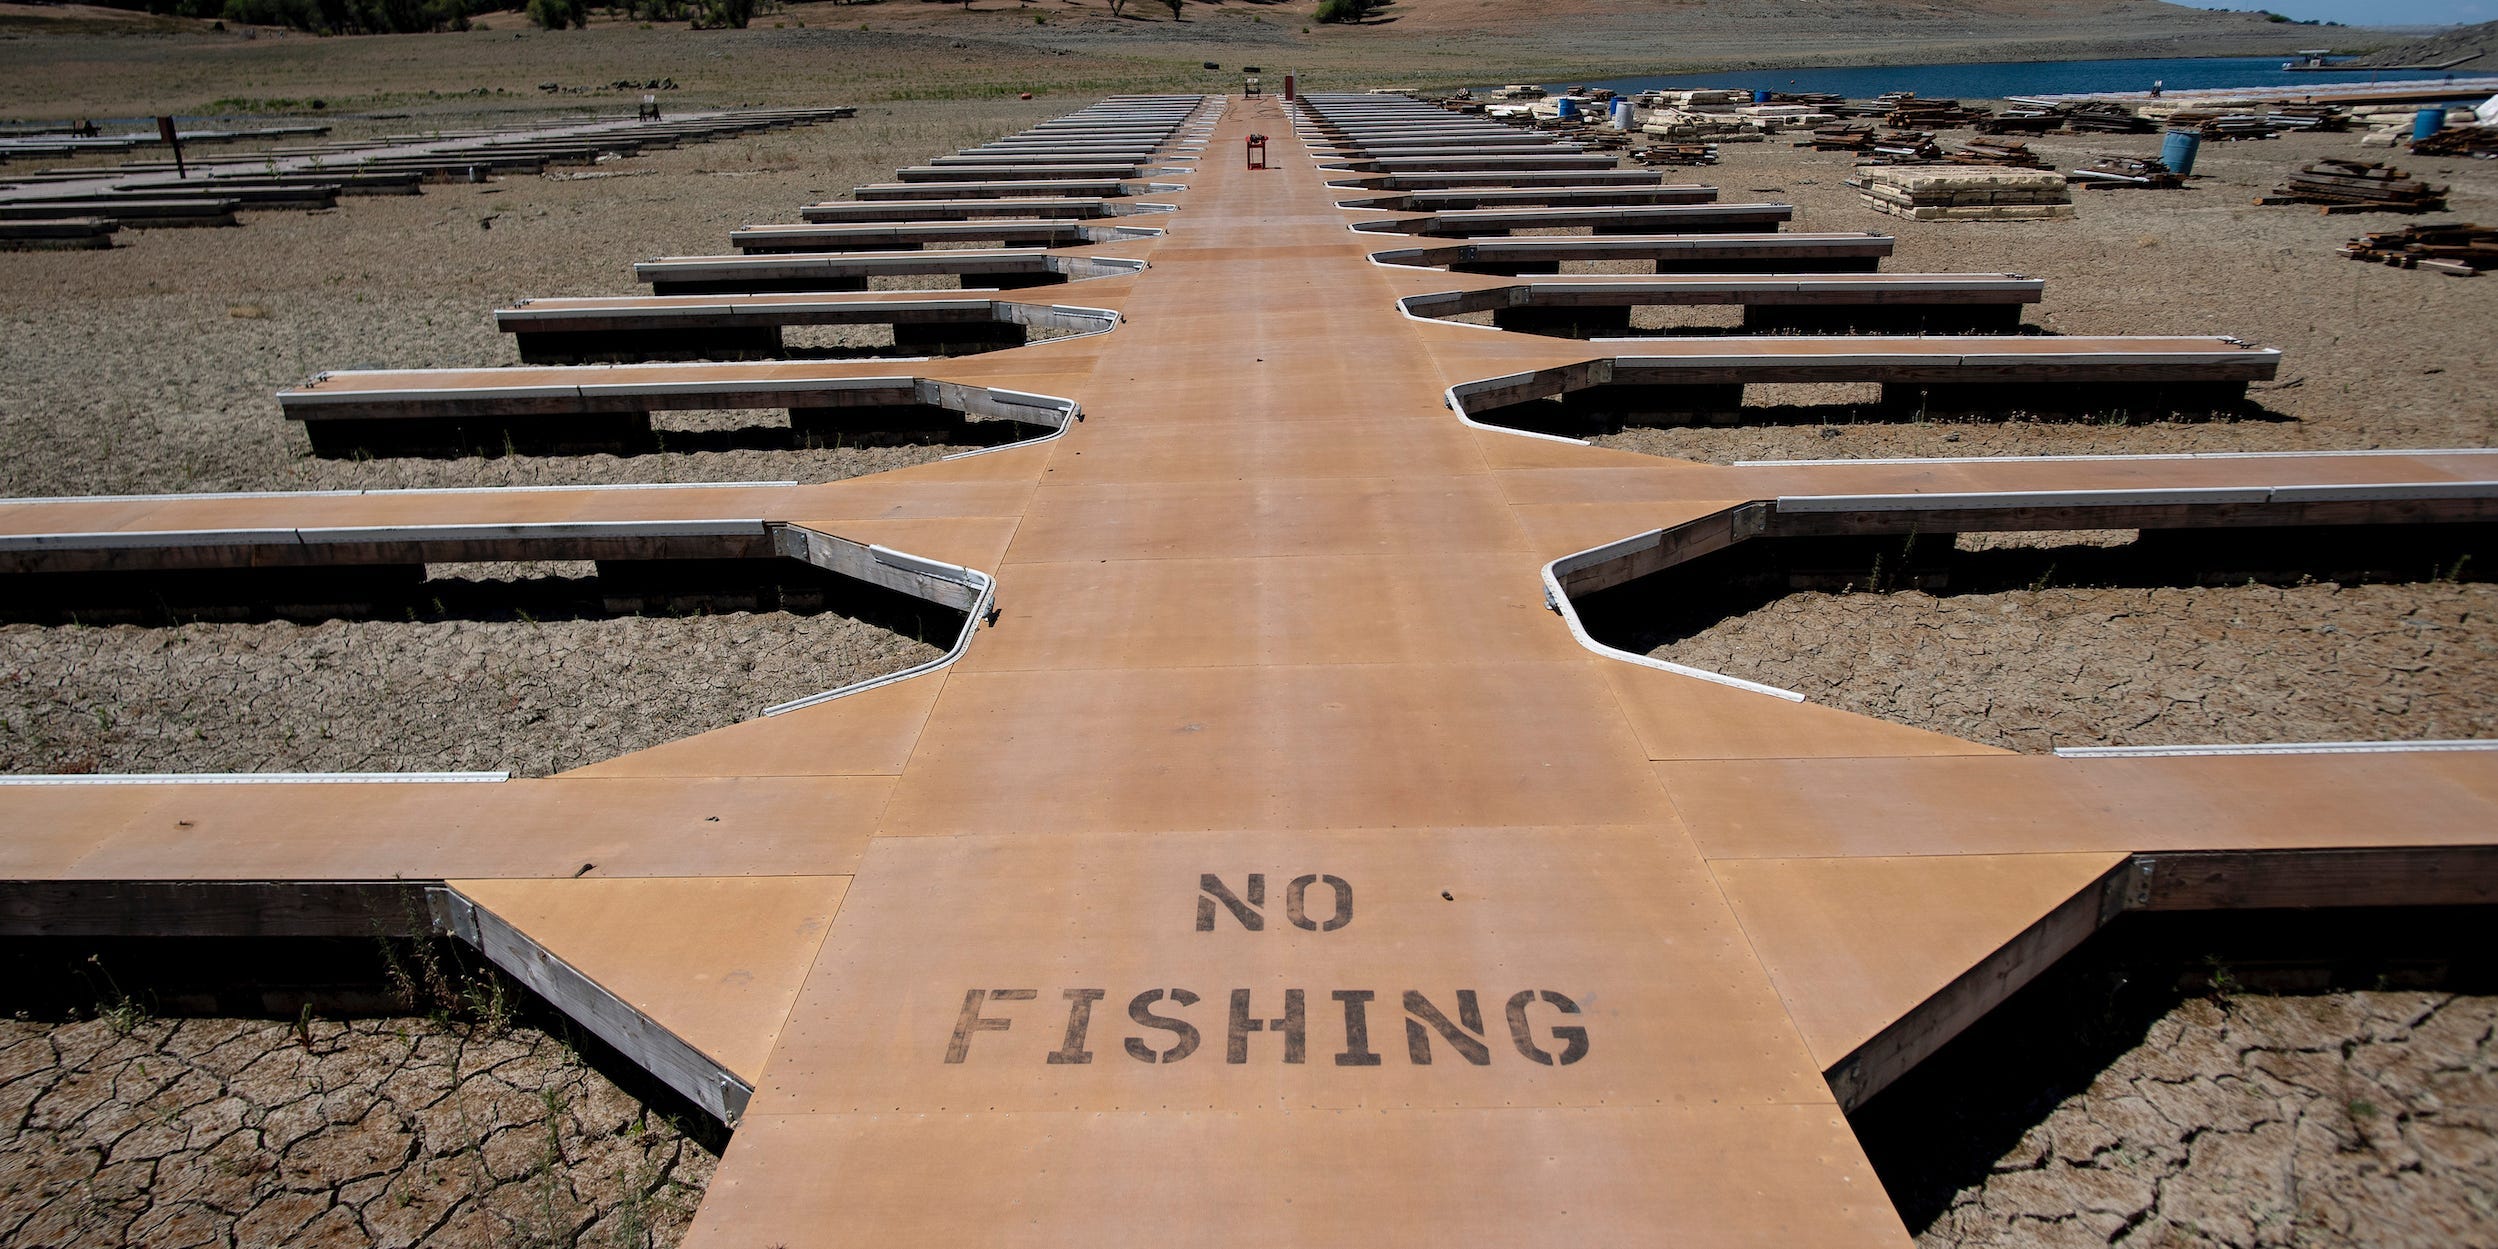 Empty boat docks sit on dry land at the Browns Ravine Cove area of drought-stricken Folsom Lake, currently at 37% of its normal capacity, in Folsom, Calif., Saturday, May 22, 2021.